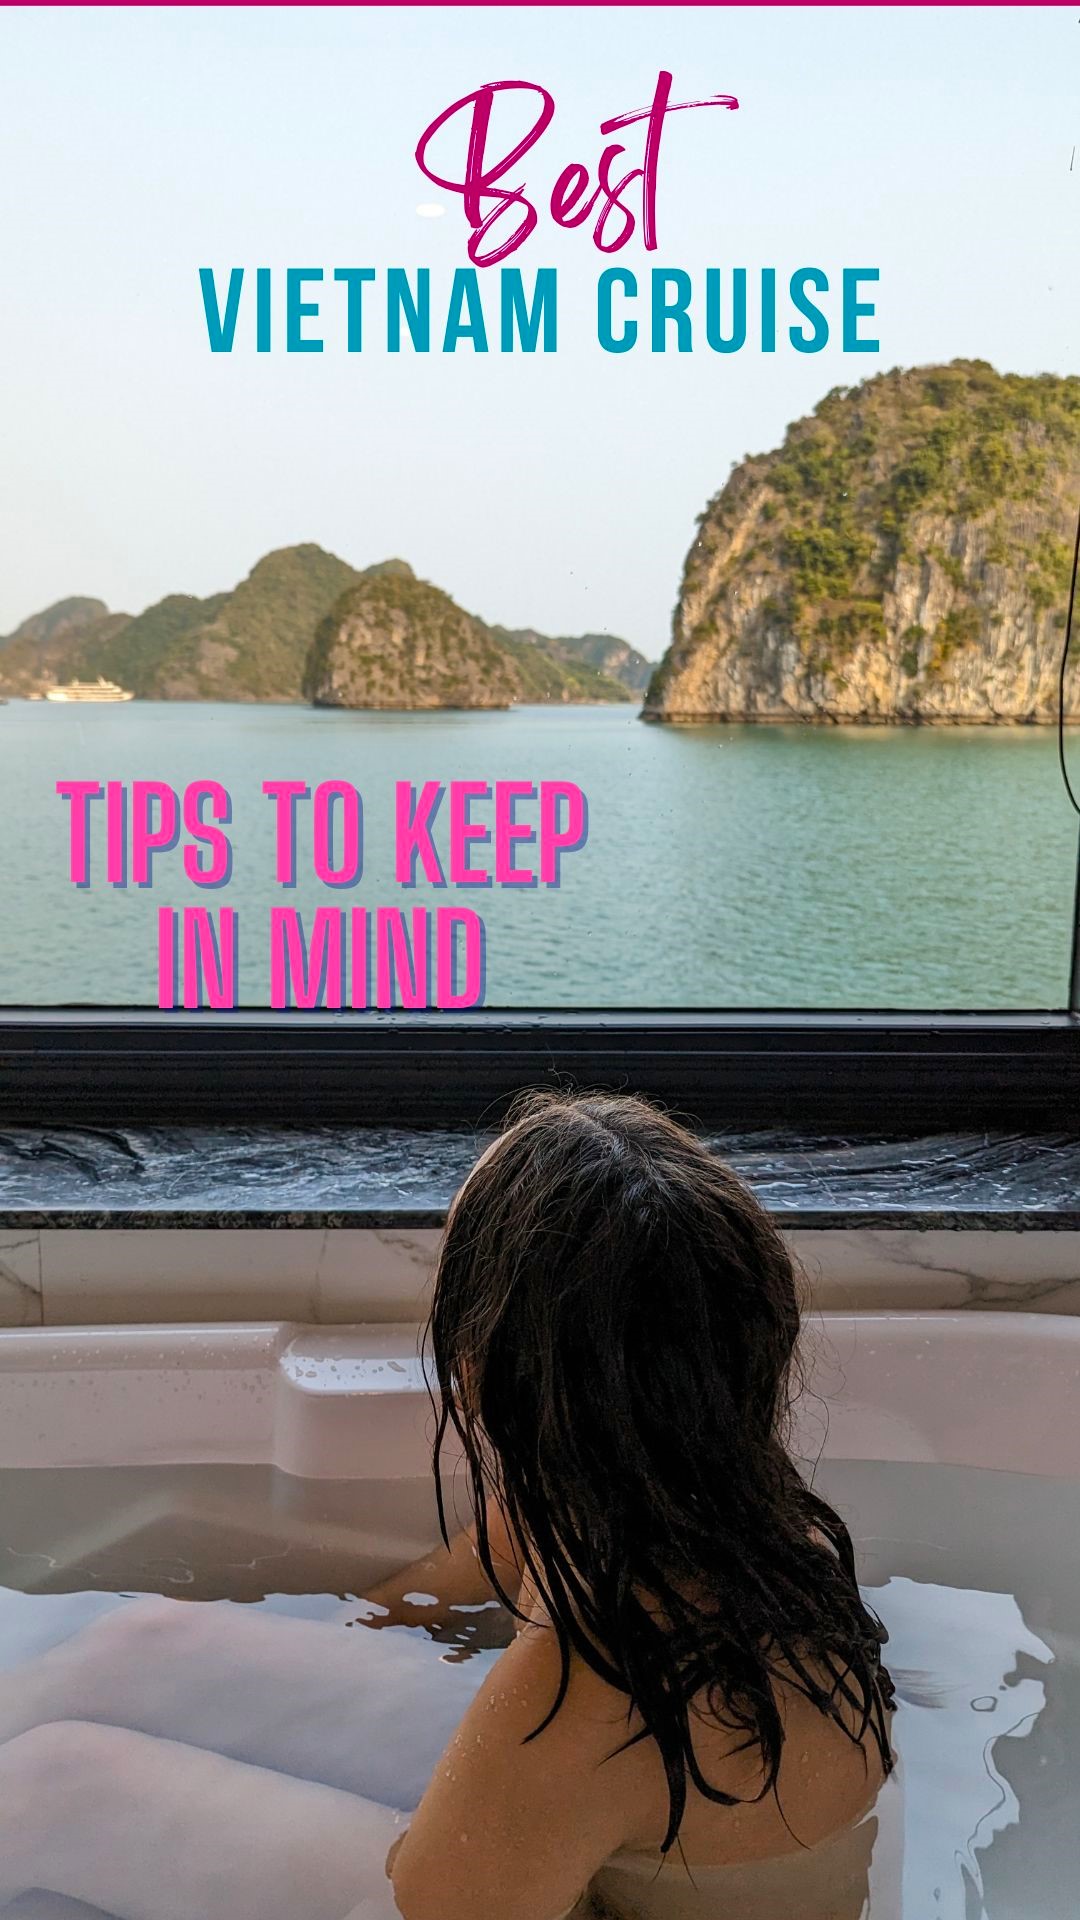 Vietnam cruise with kids tips